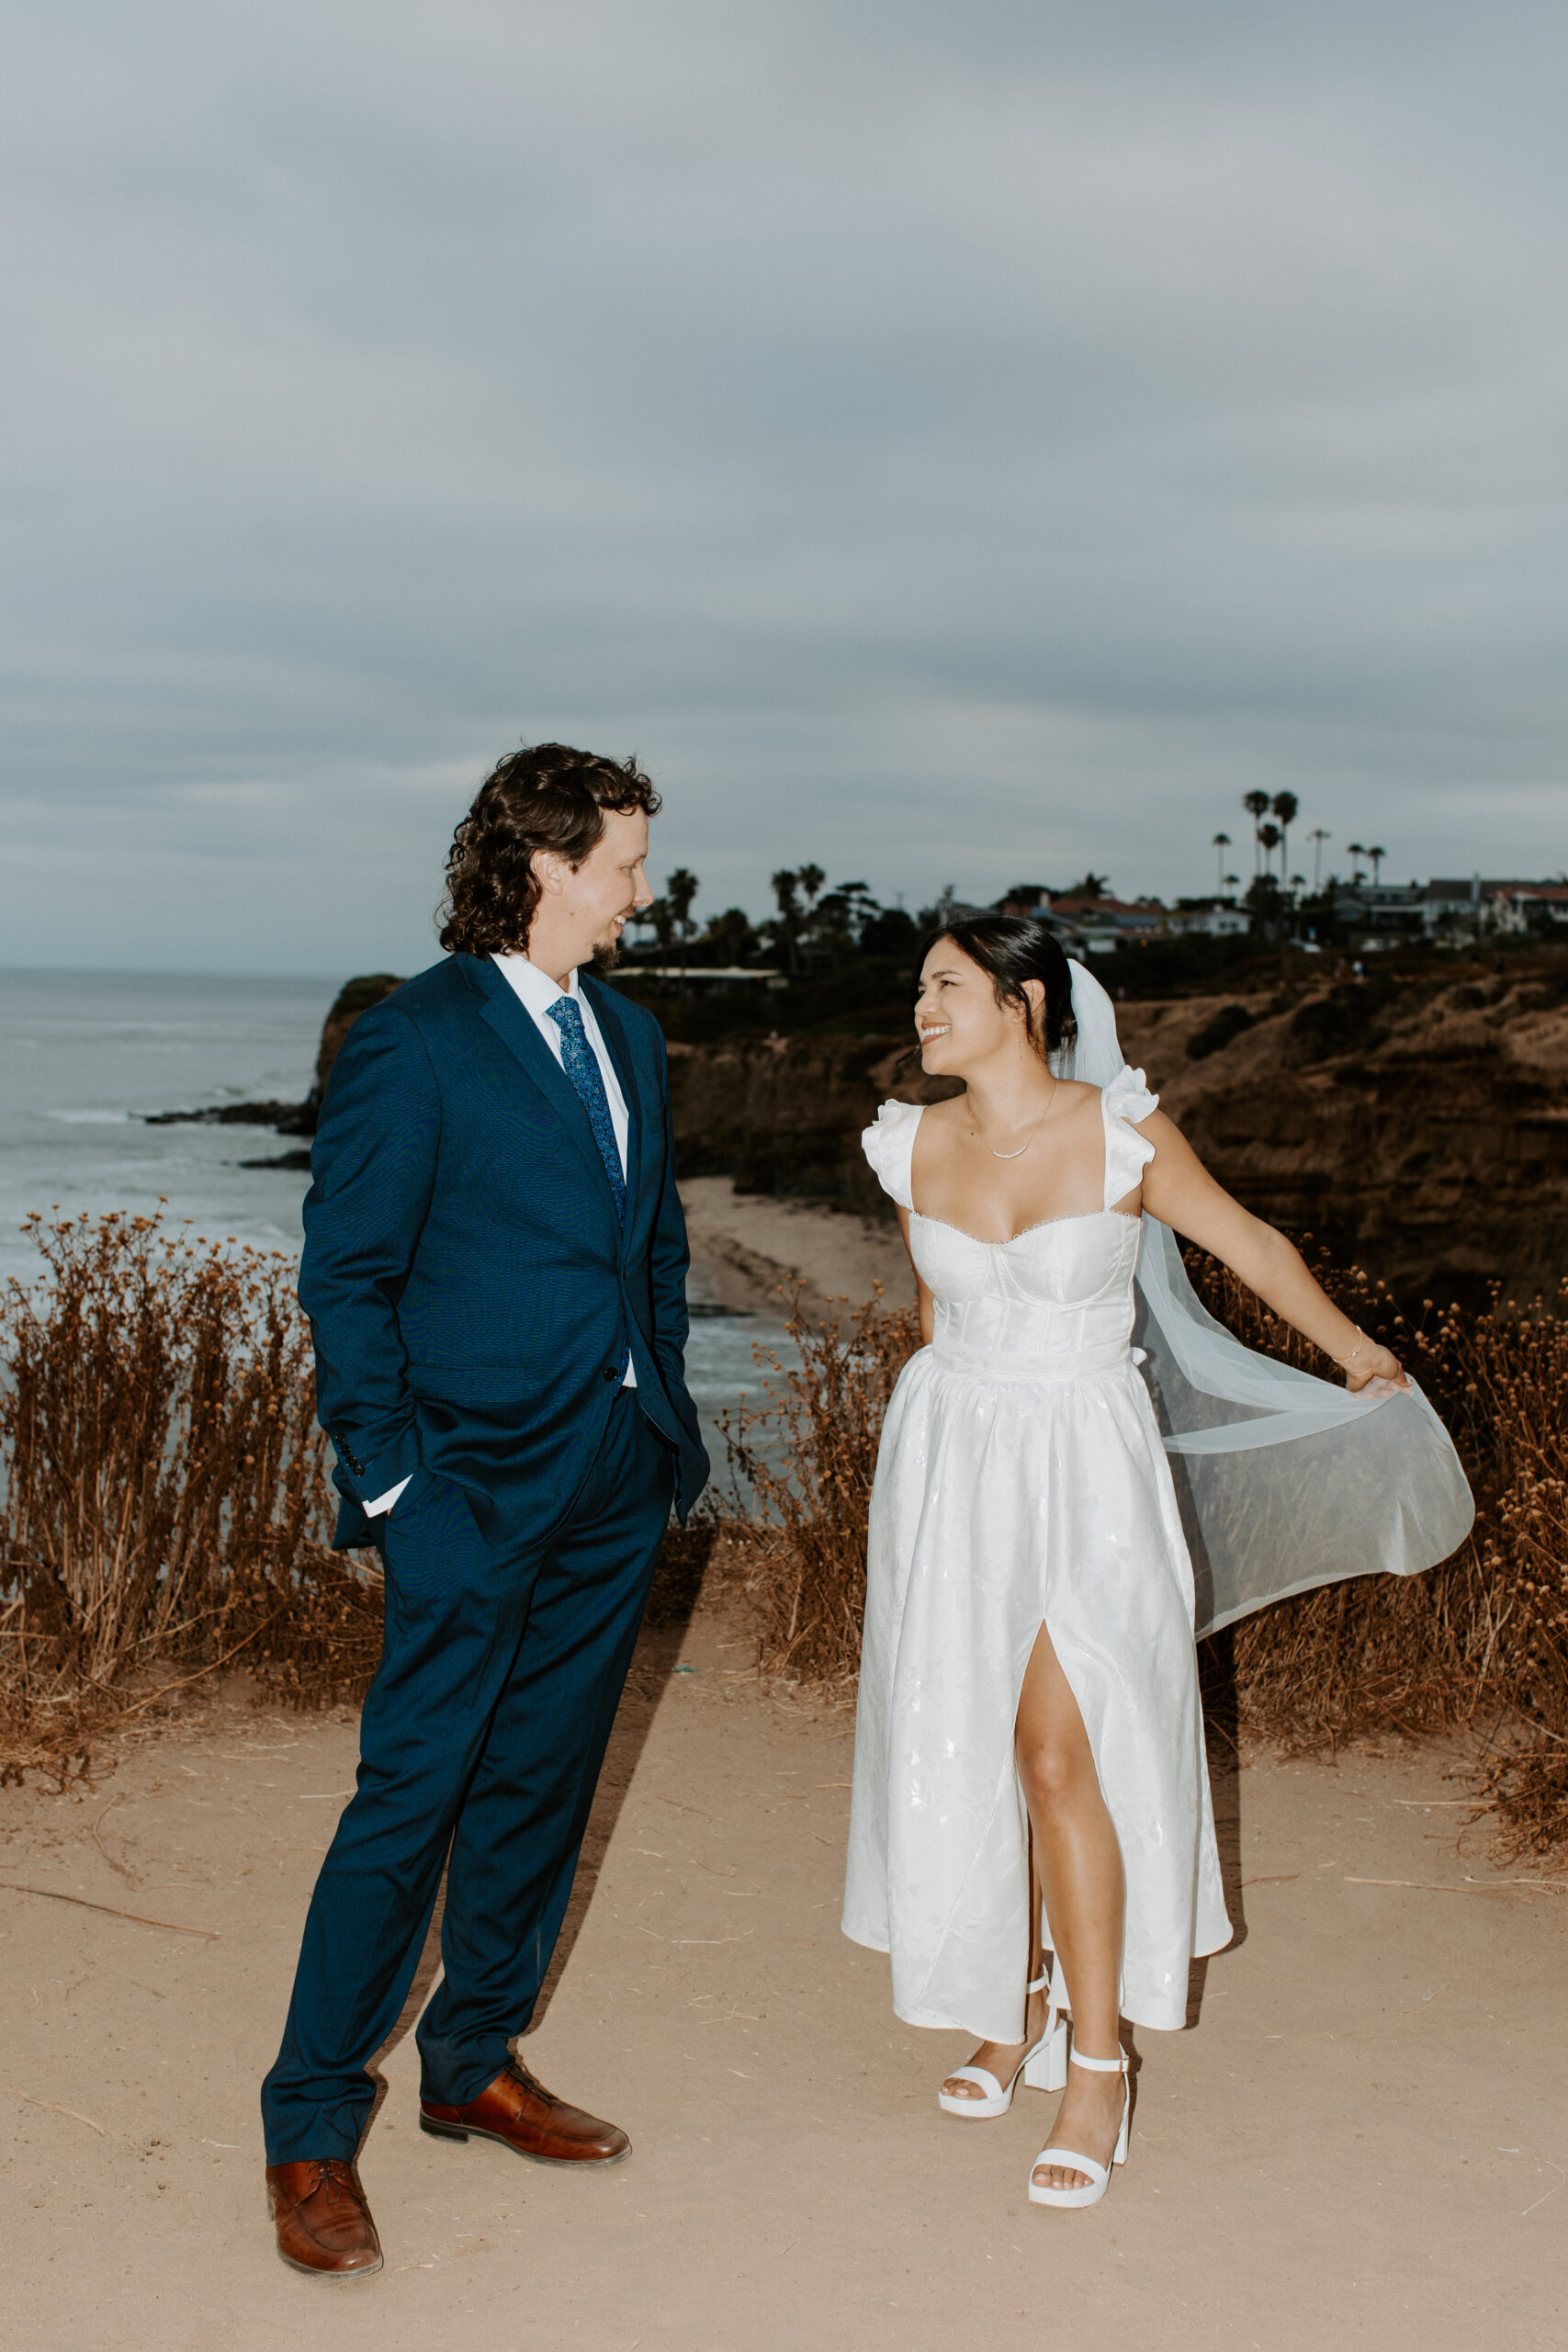 A Guide to Planning a fun San Diego Elopement